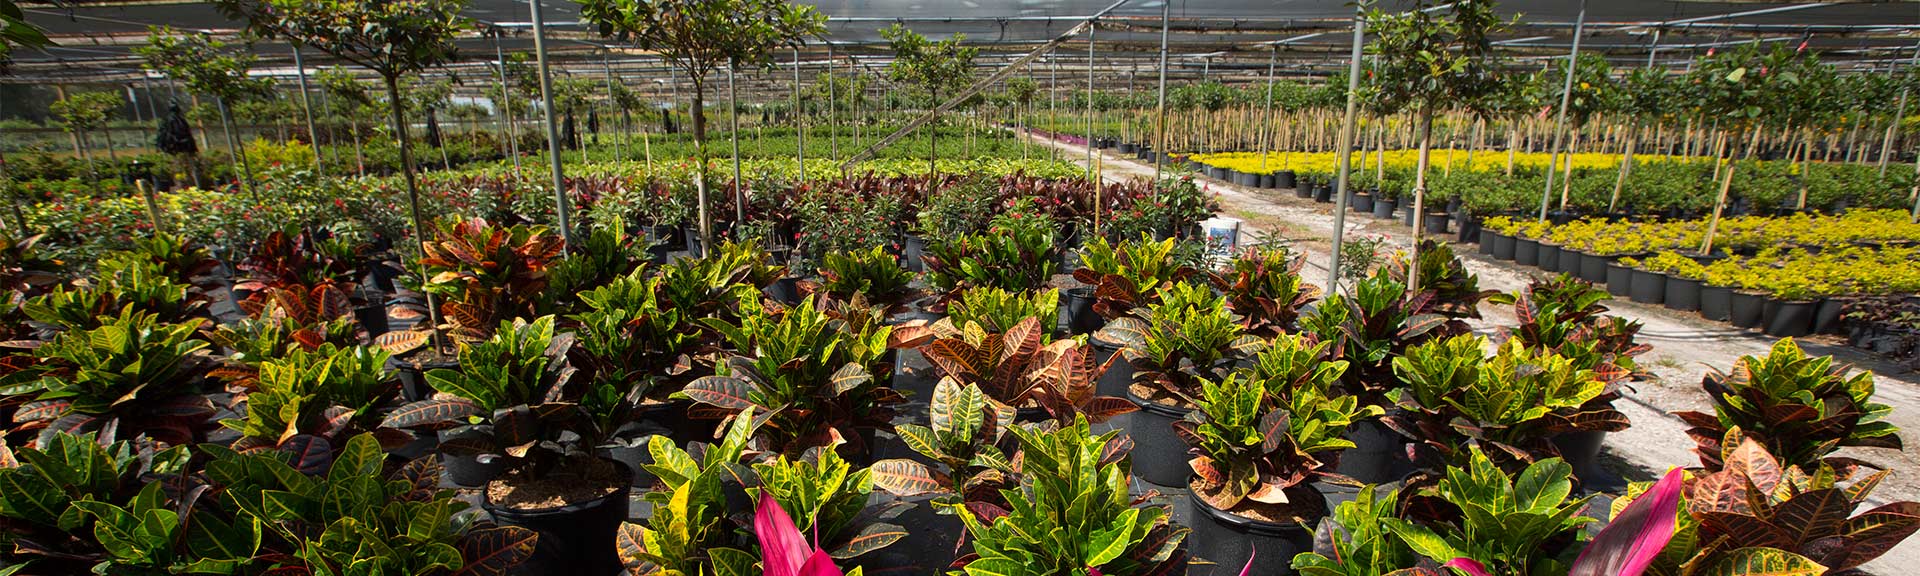 Market Category Page - Outdoor Nurseries 